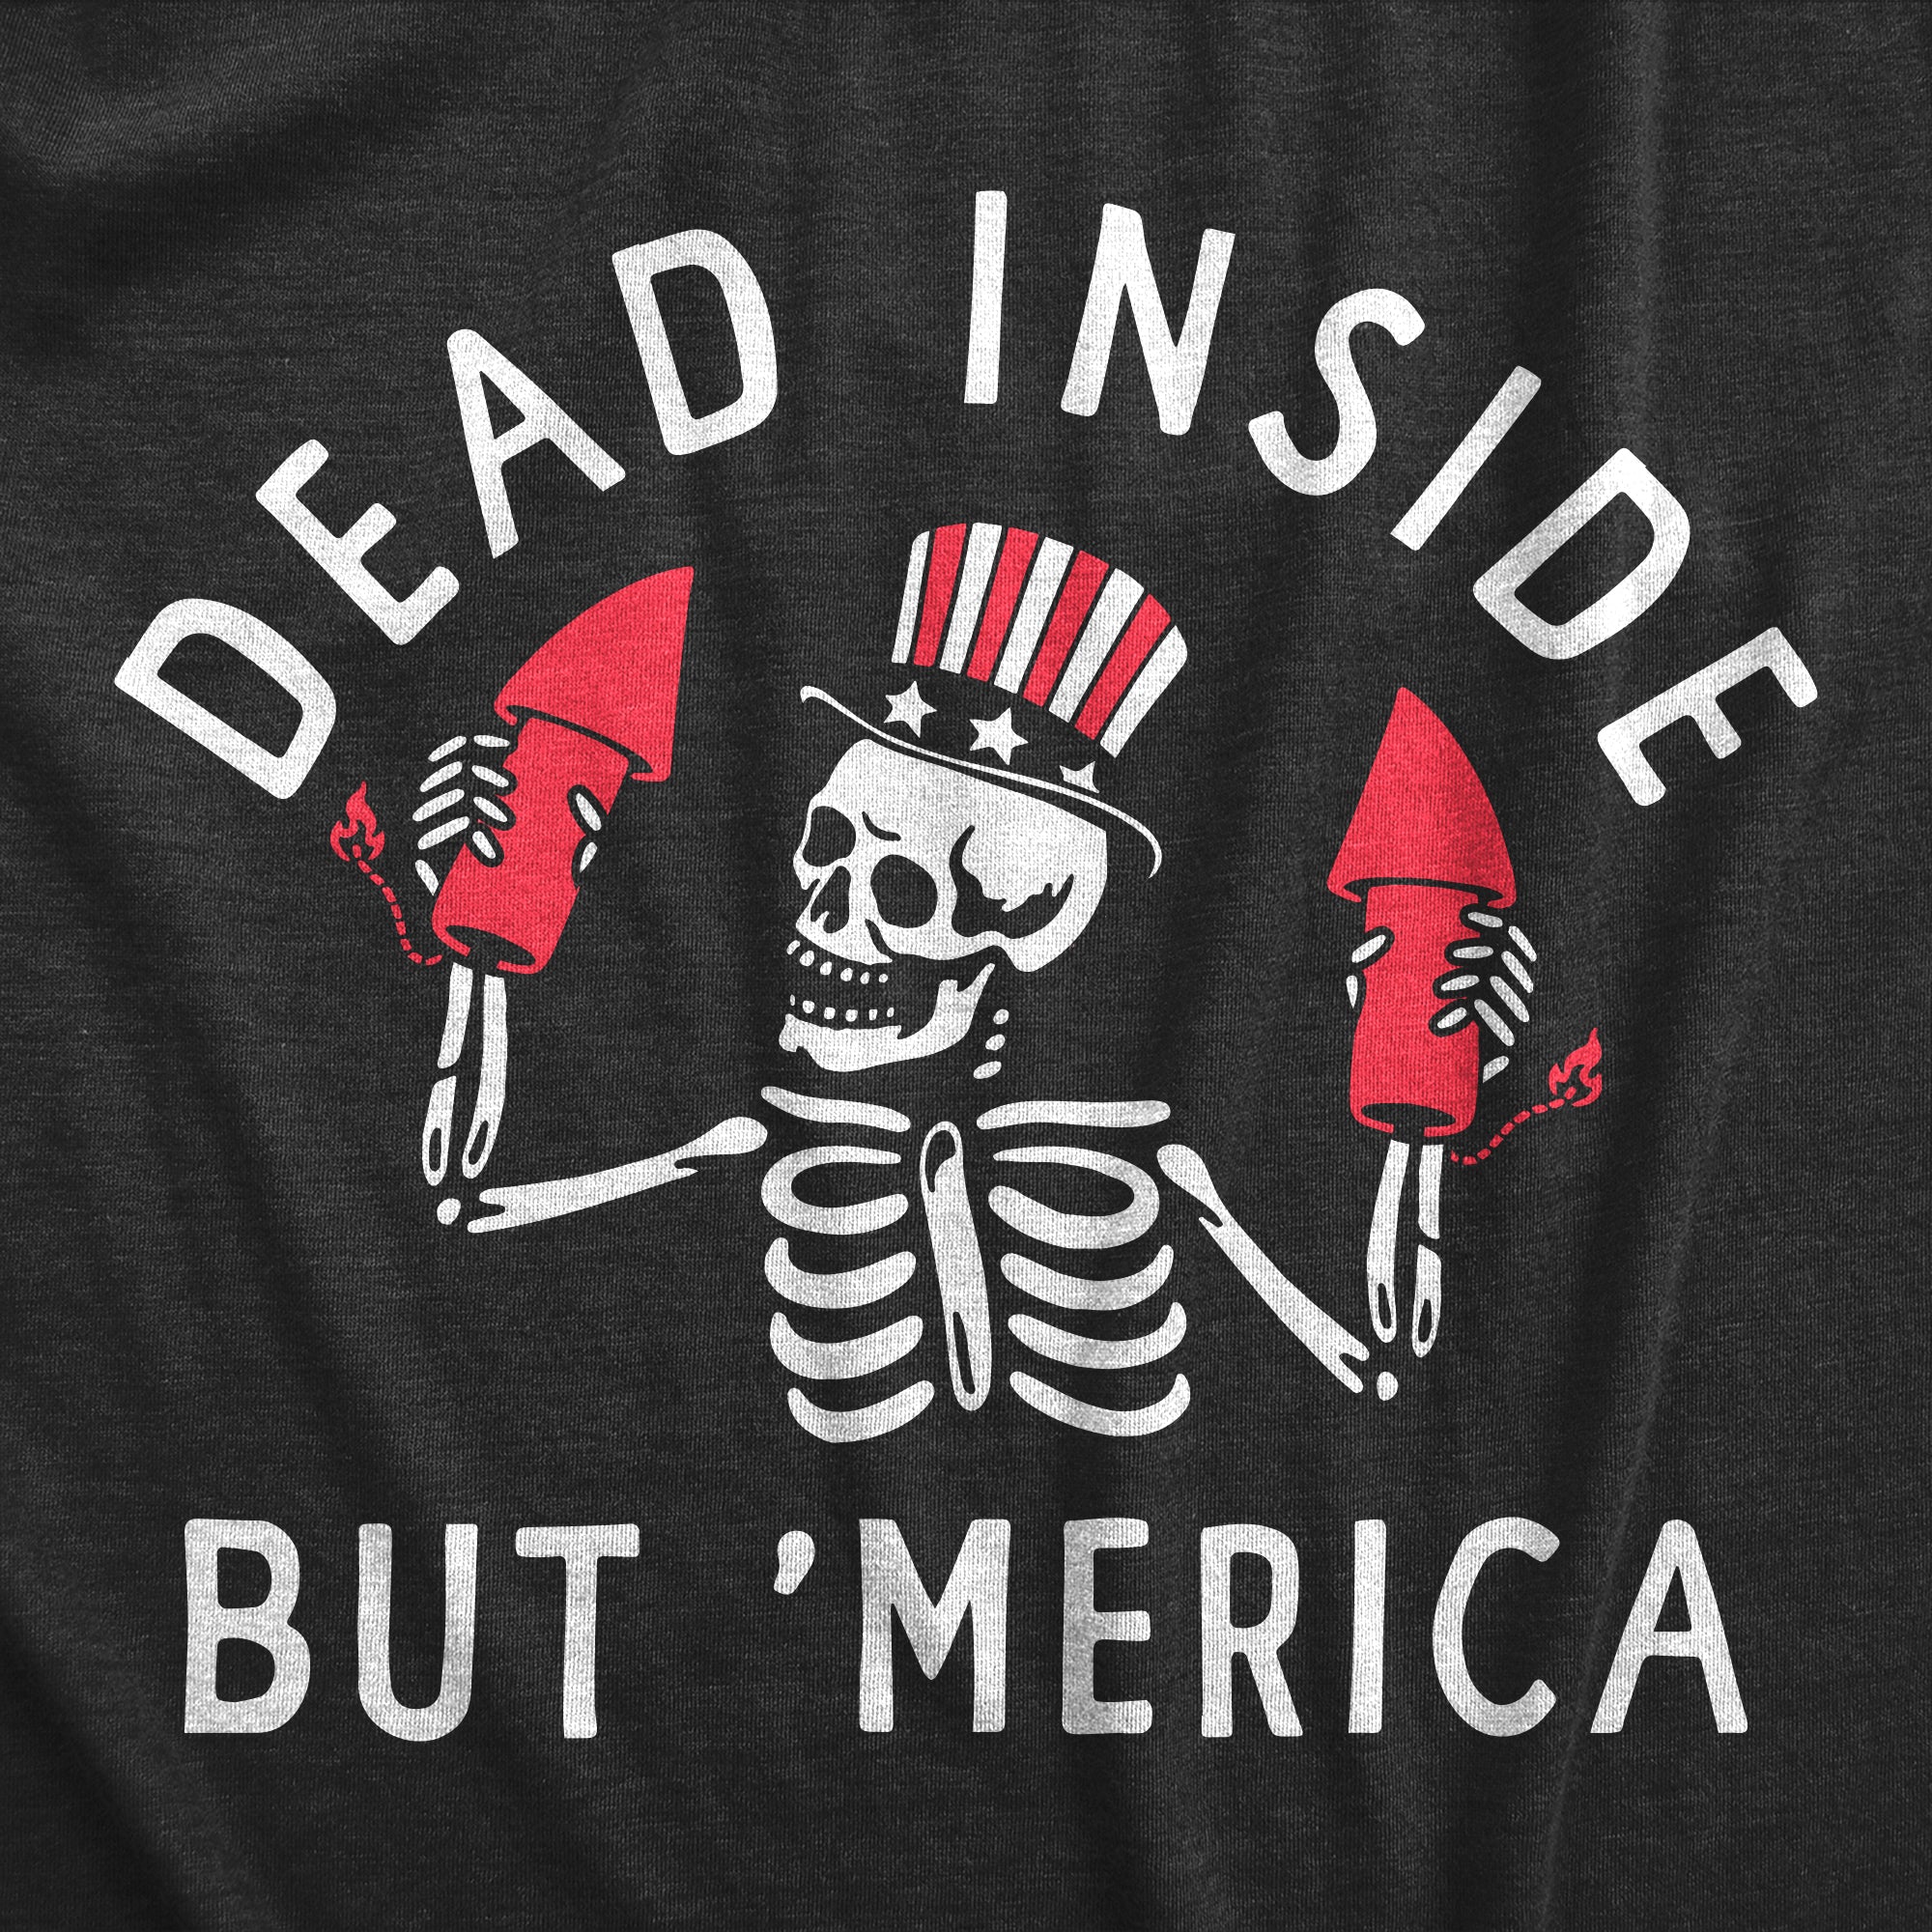 Funny Heather Black - MERICA Dead Inside But Merica Womens T Shirt Nerdy Fourth Of July Sarcastic Tee